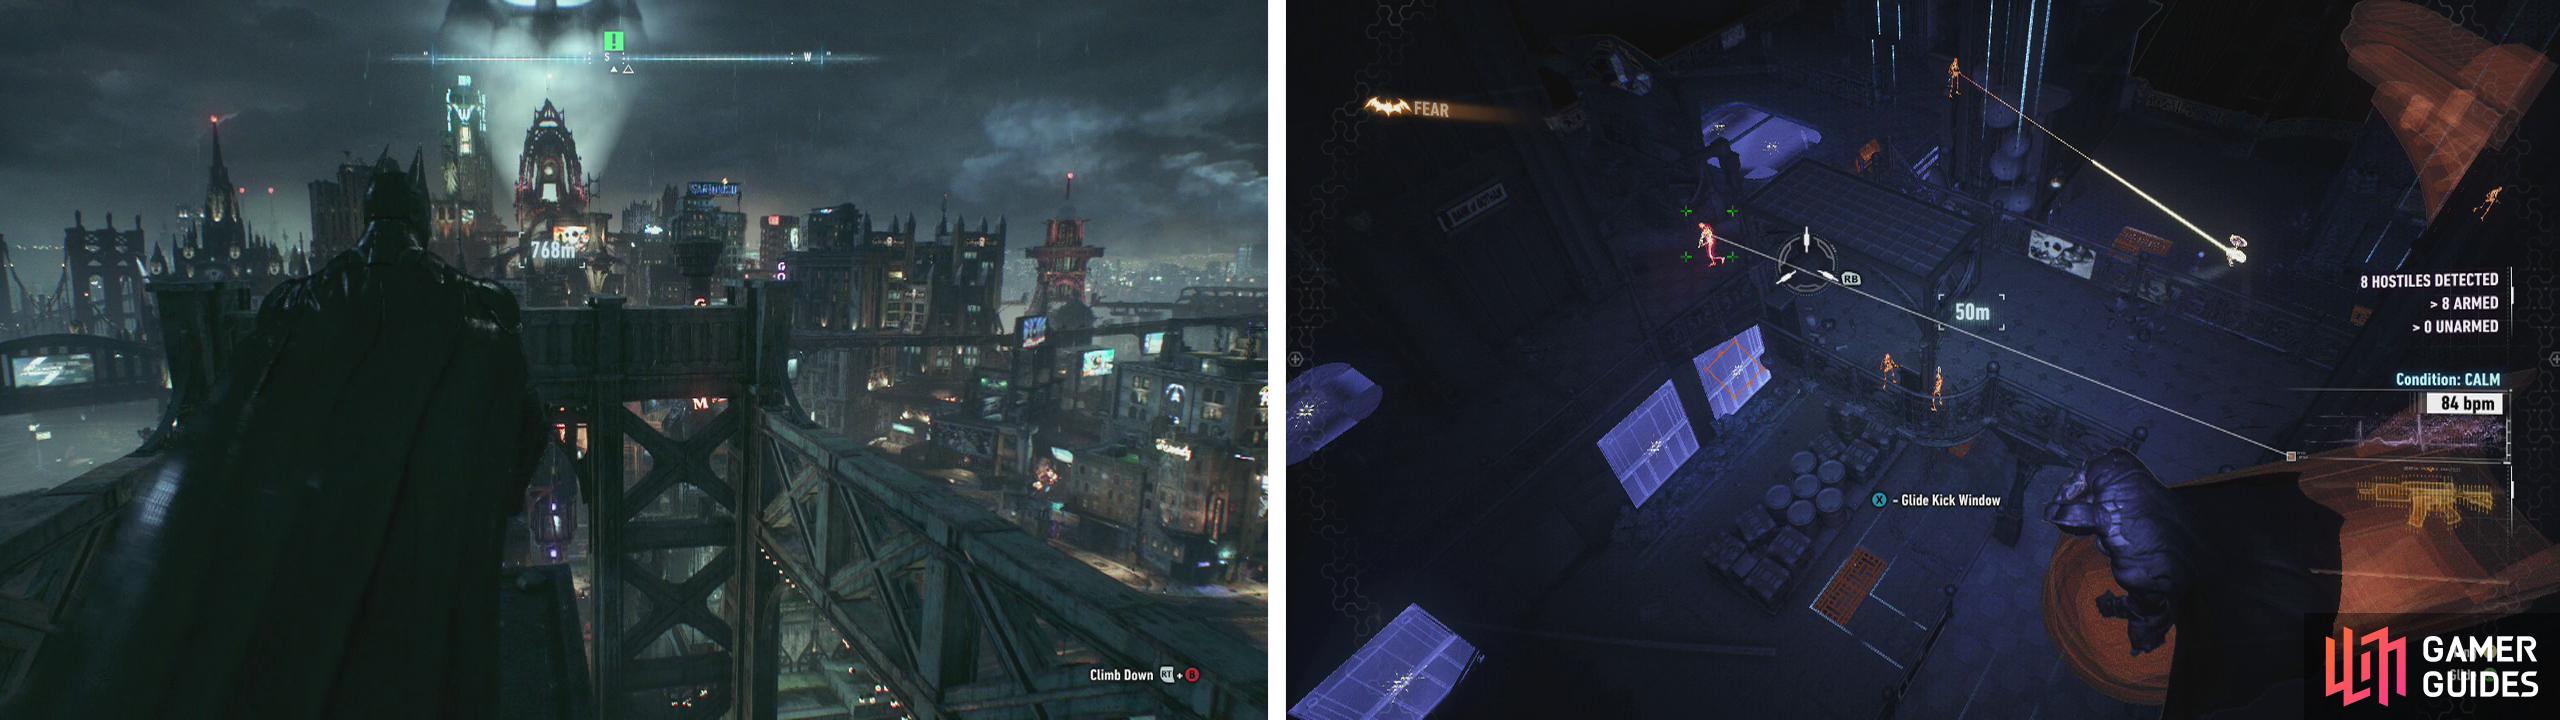 Fly over to Grand Avenue Station (left). Use the vantage points to scope out the area (right).